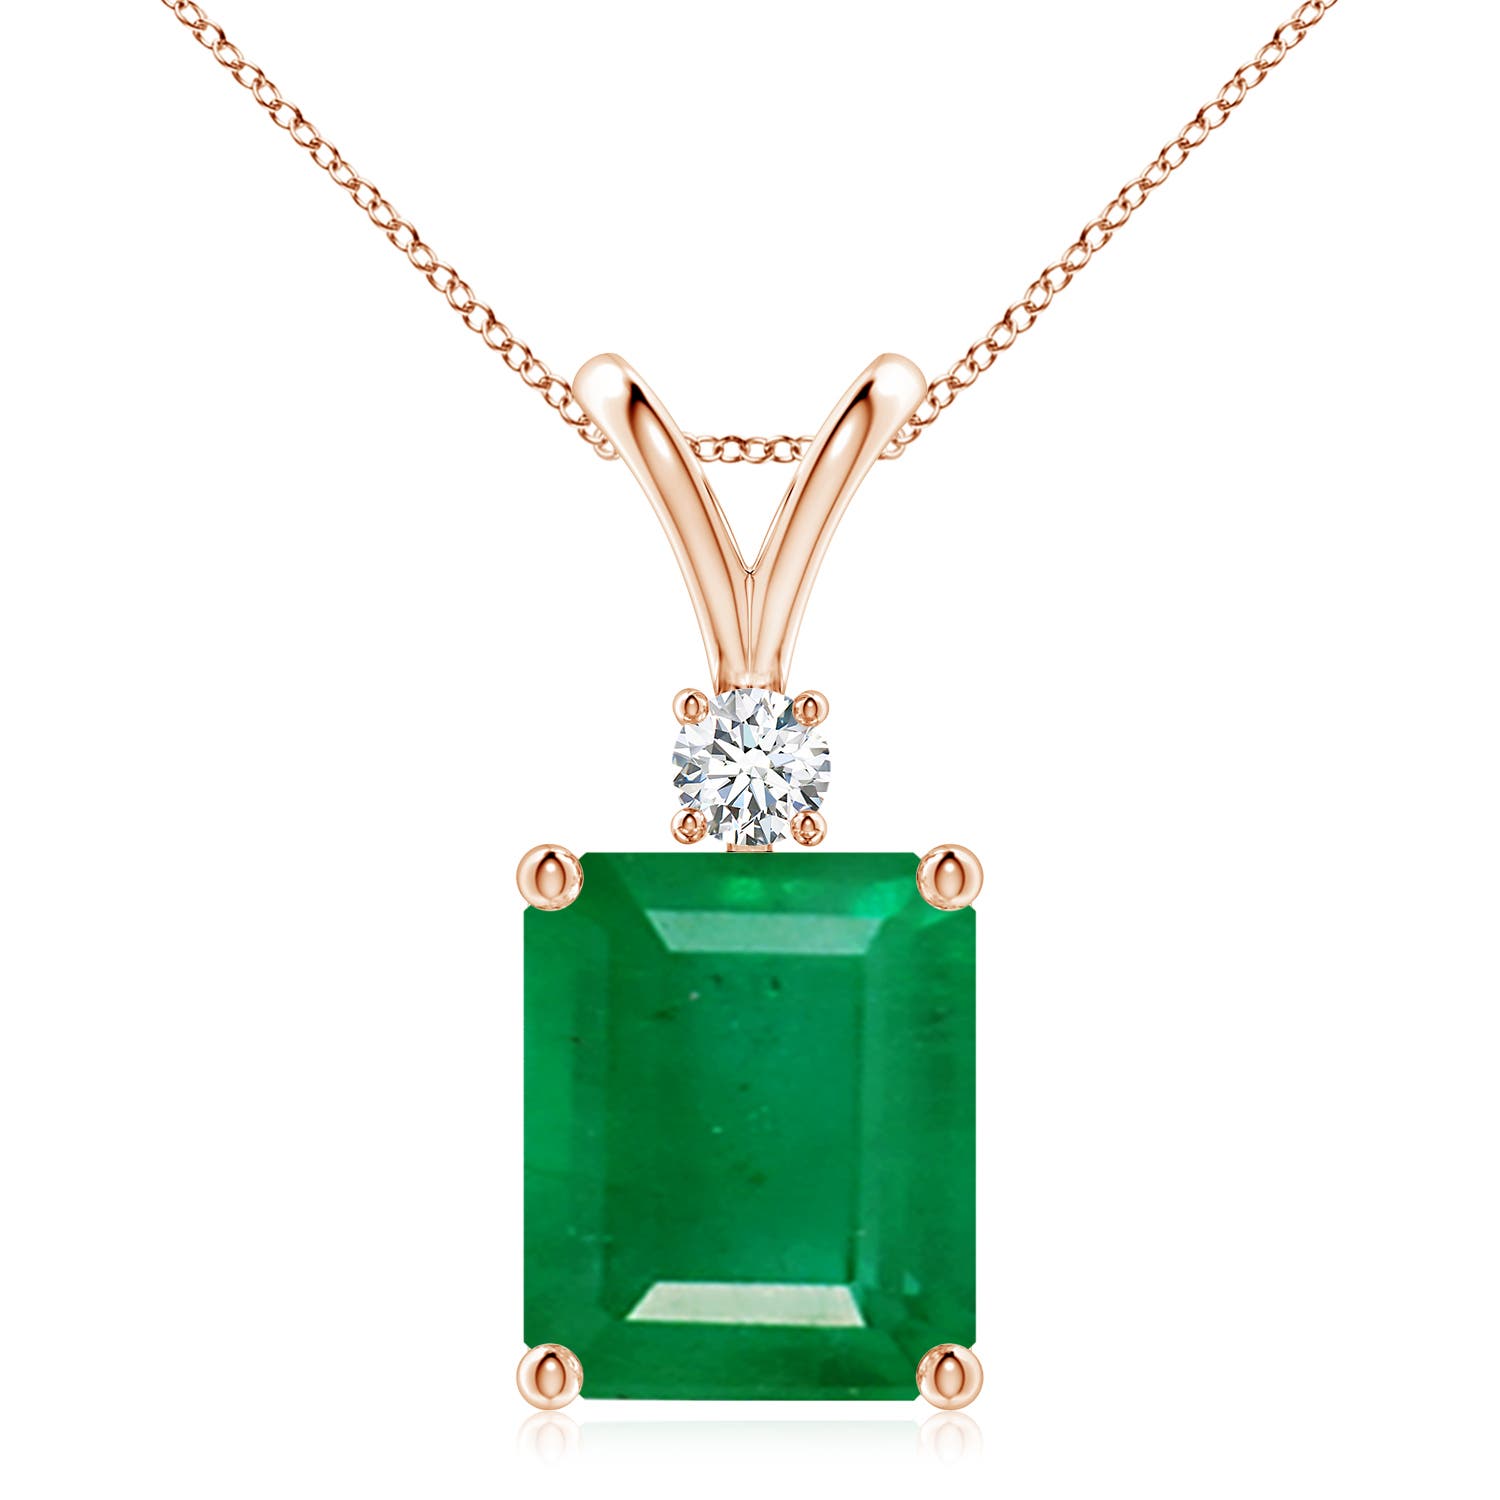 AA - Emerald / 5.91 CT / 14 KT Rose Gold